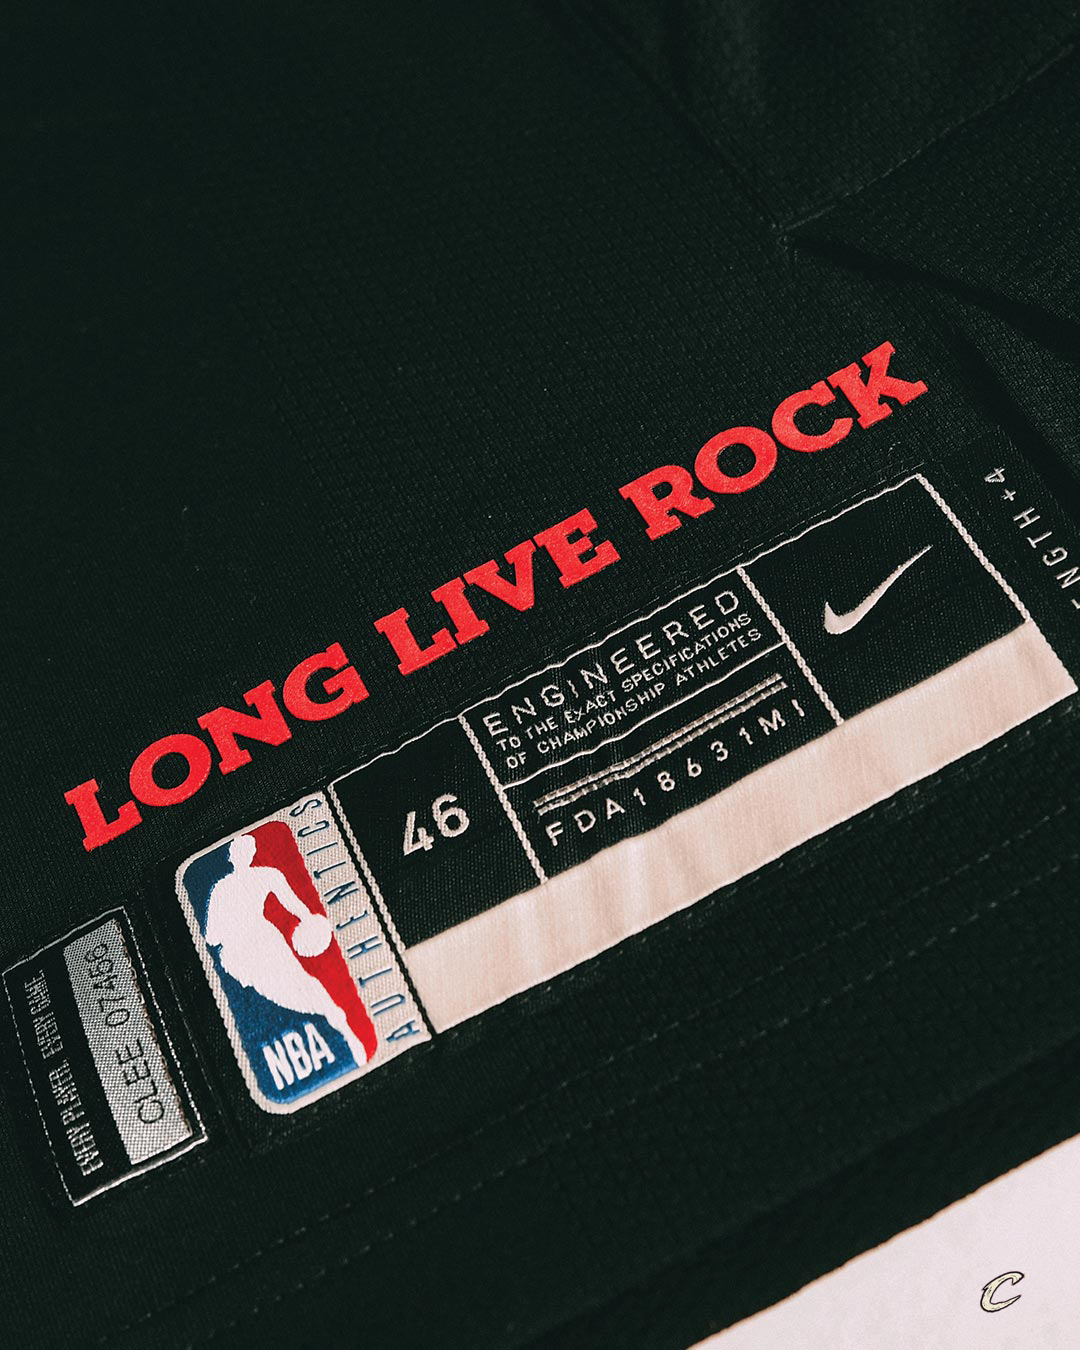 Cavs news: Cleveland unveils rock and roll-inspired City Edition